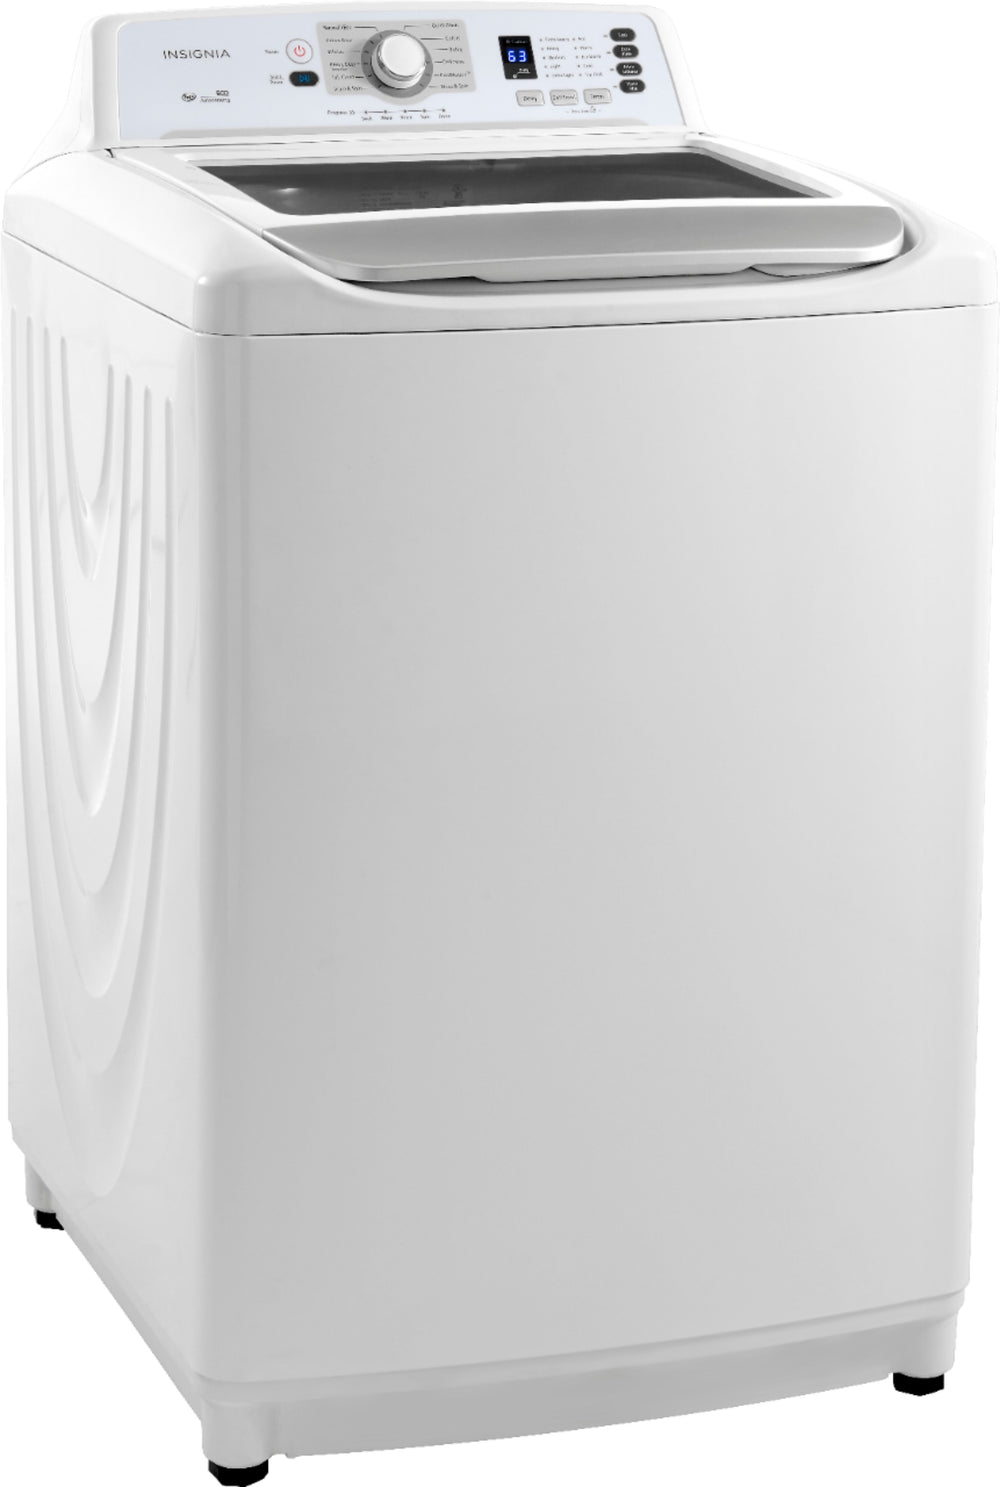 Insignia™ - 4.5 Cu. Ft. High Efficiency Top Load Washer with ColdMotion Technology - White_1